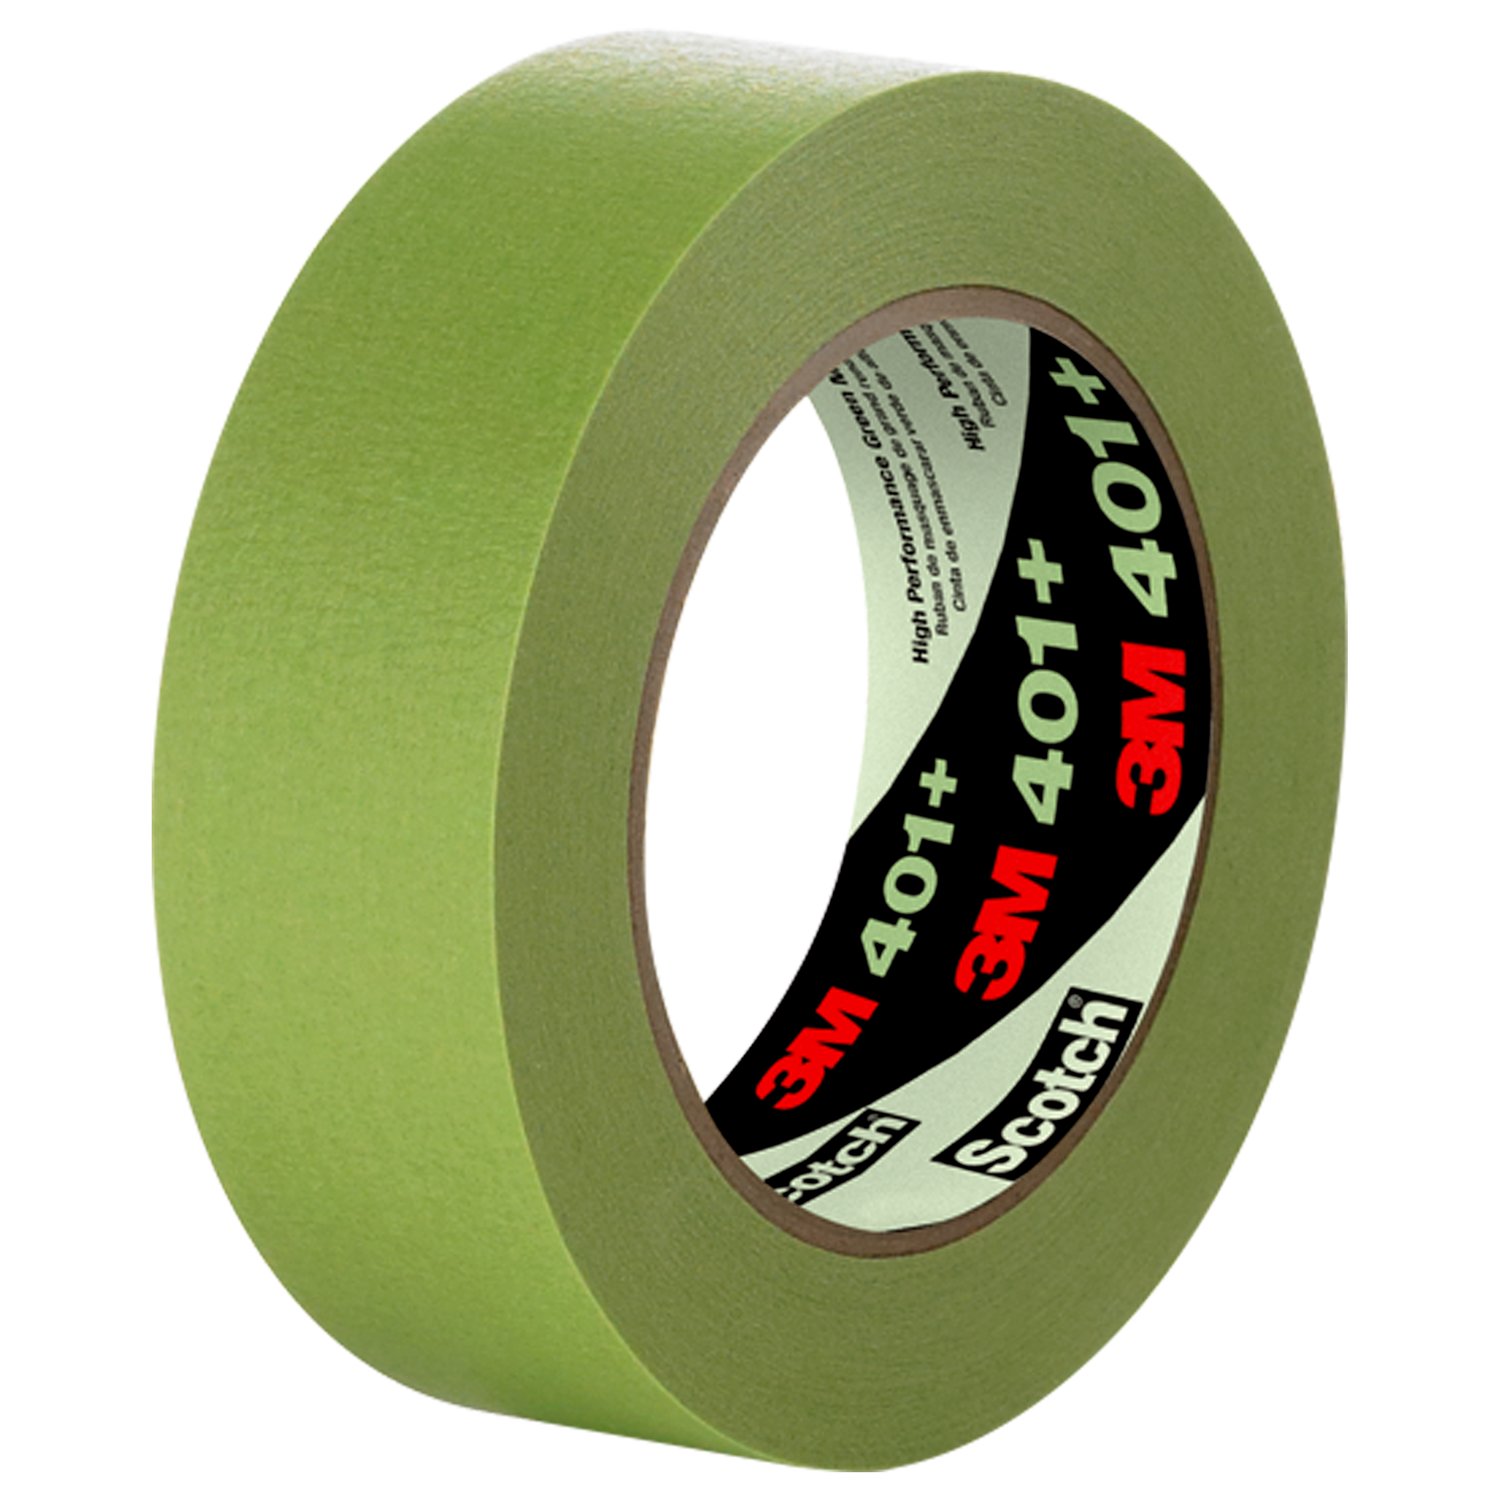 00076308982294, 3M High Performance Green Masking Tape 401+, 144 mm x 55 m,  6.7 mil, 8 Roll/Case, Aircraft product, Masking-Tapes